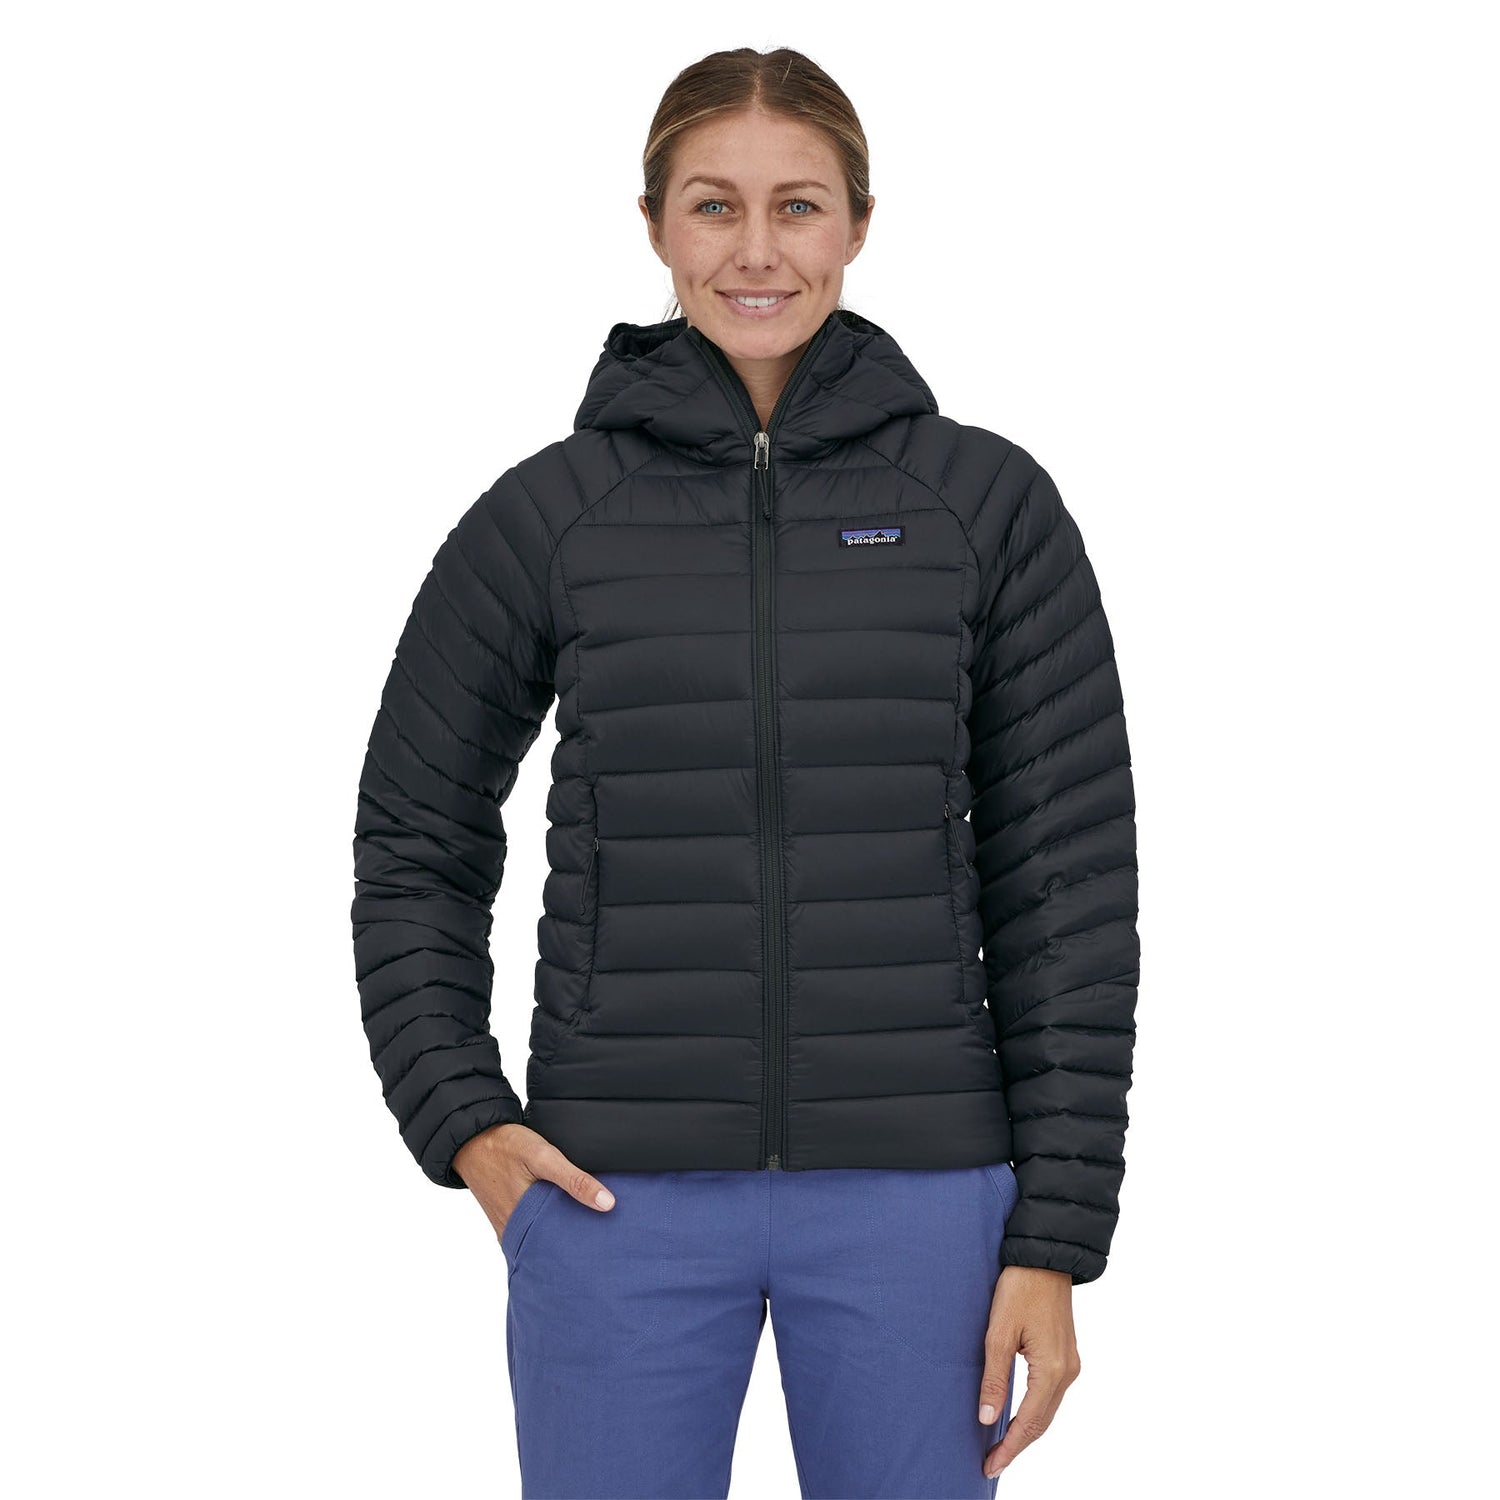 Patagonia - W's Down Sweater Hoody - Recycled Nylon & RDS certified Down - Weekendbee - sustainable sportswear